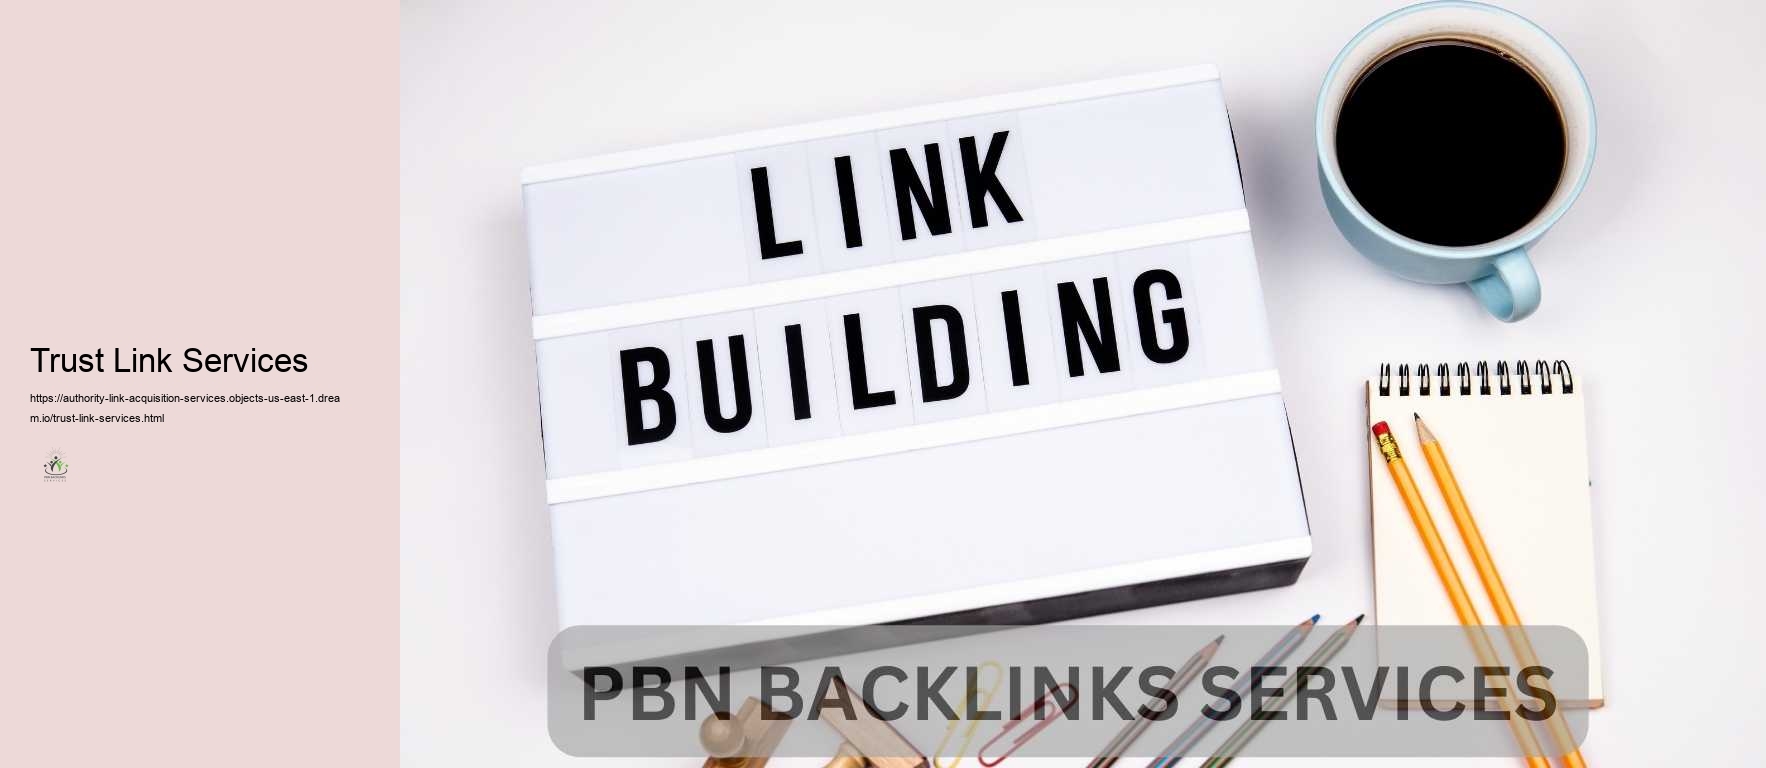 Trust Link Services